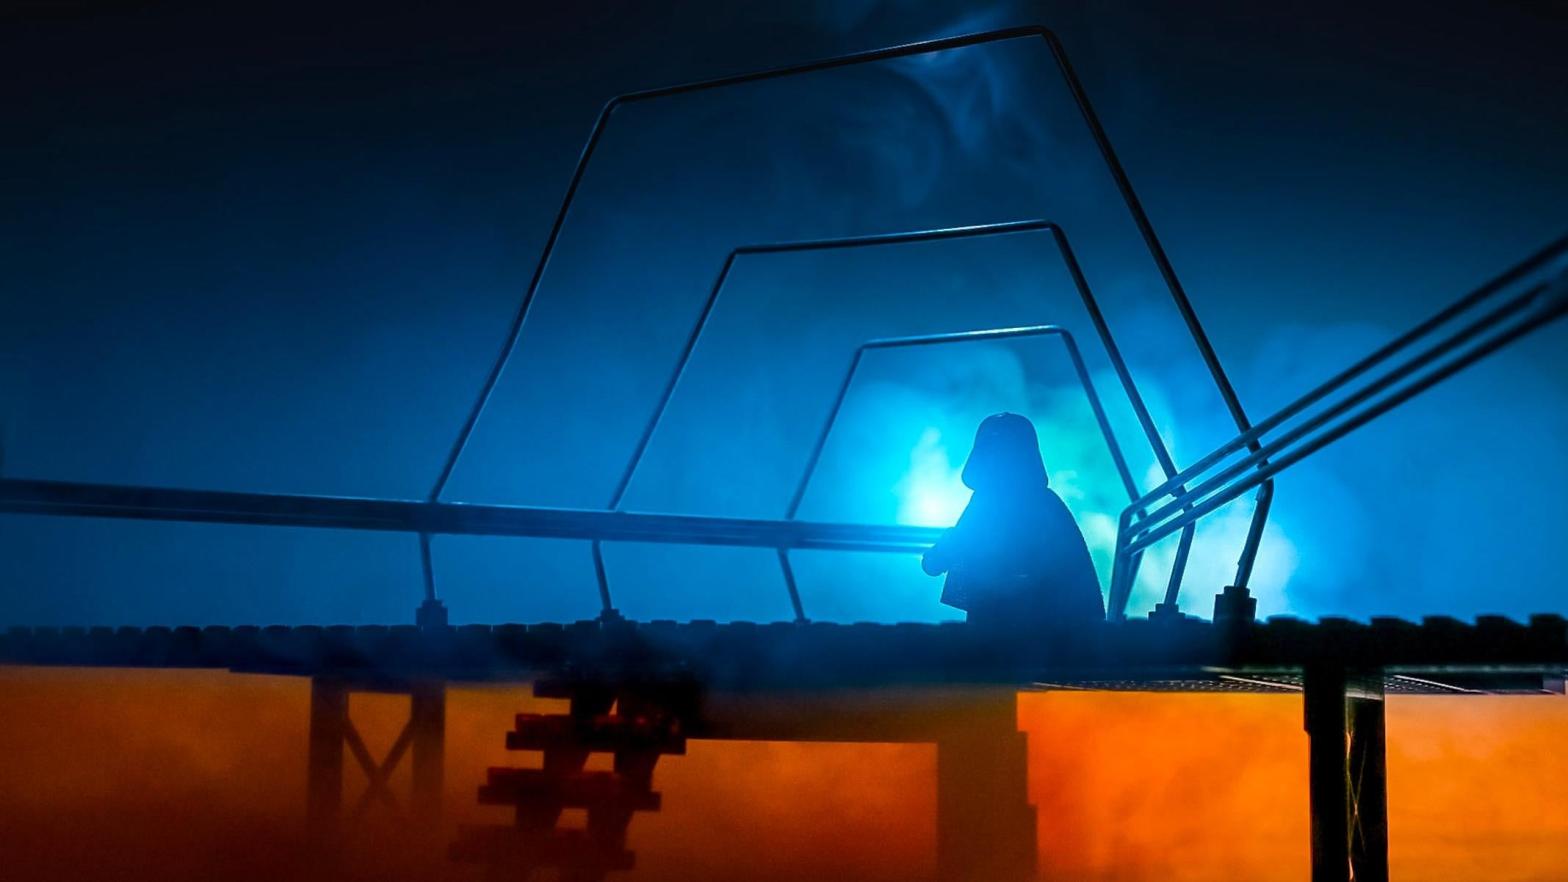 Lego Star Wars Has Never Looked as Breathtaking as This